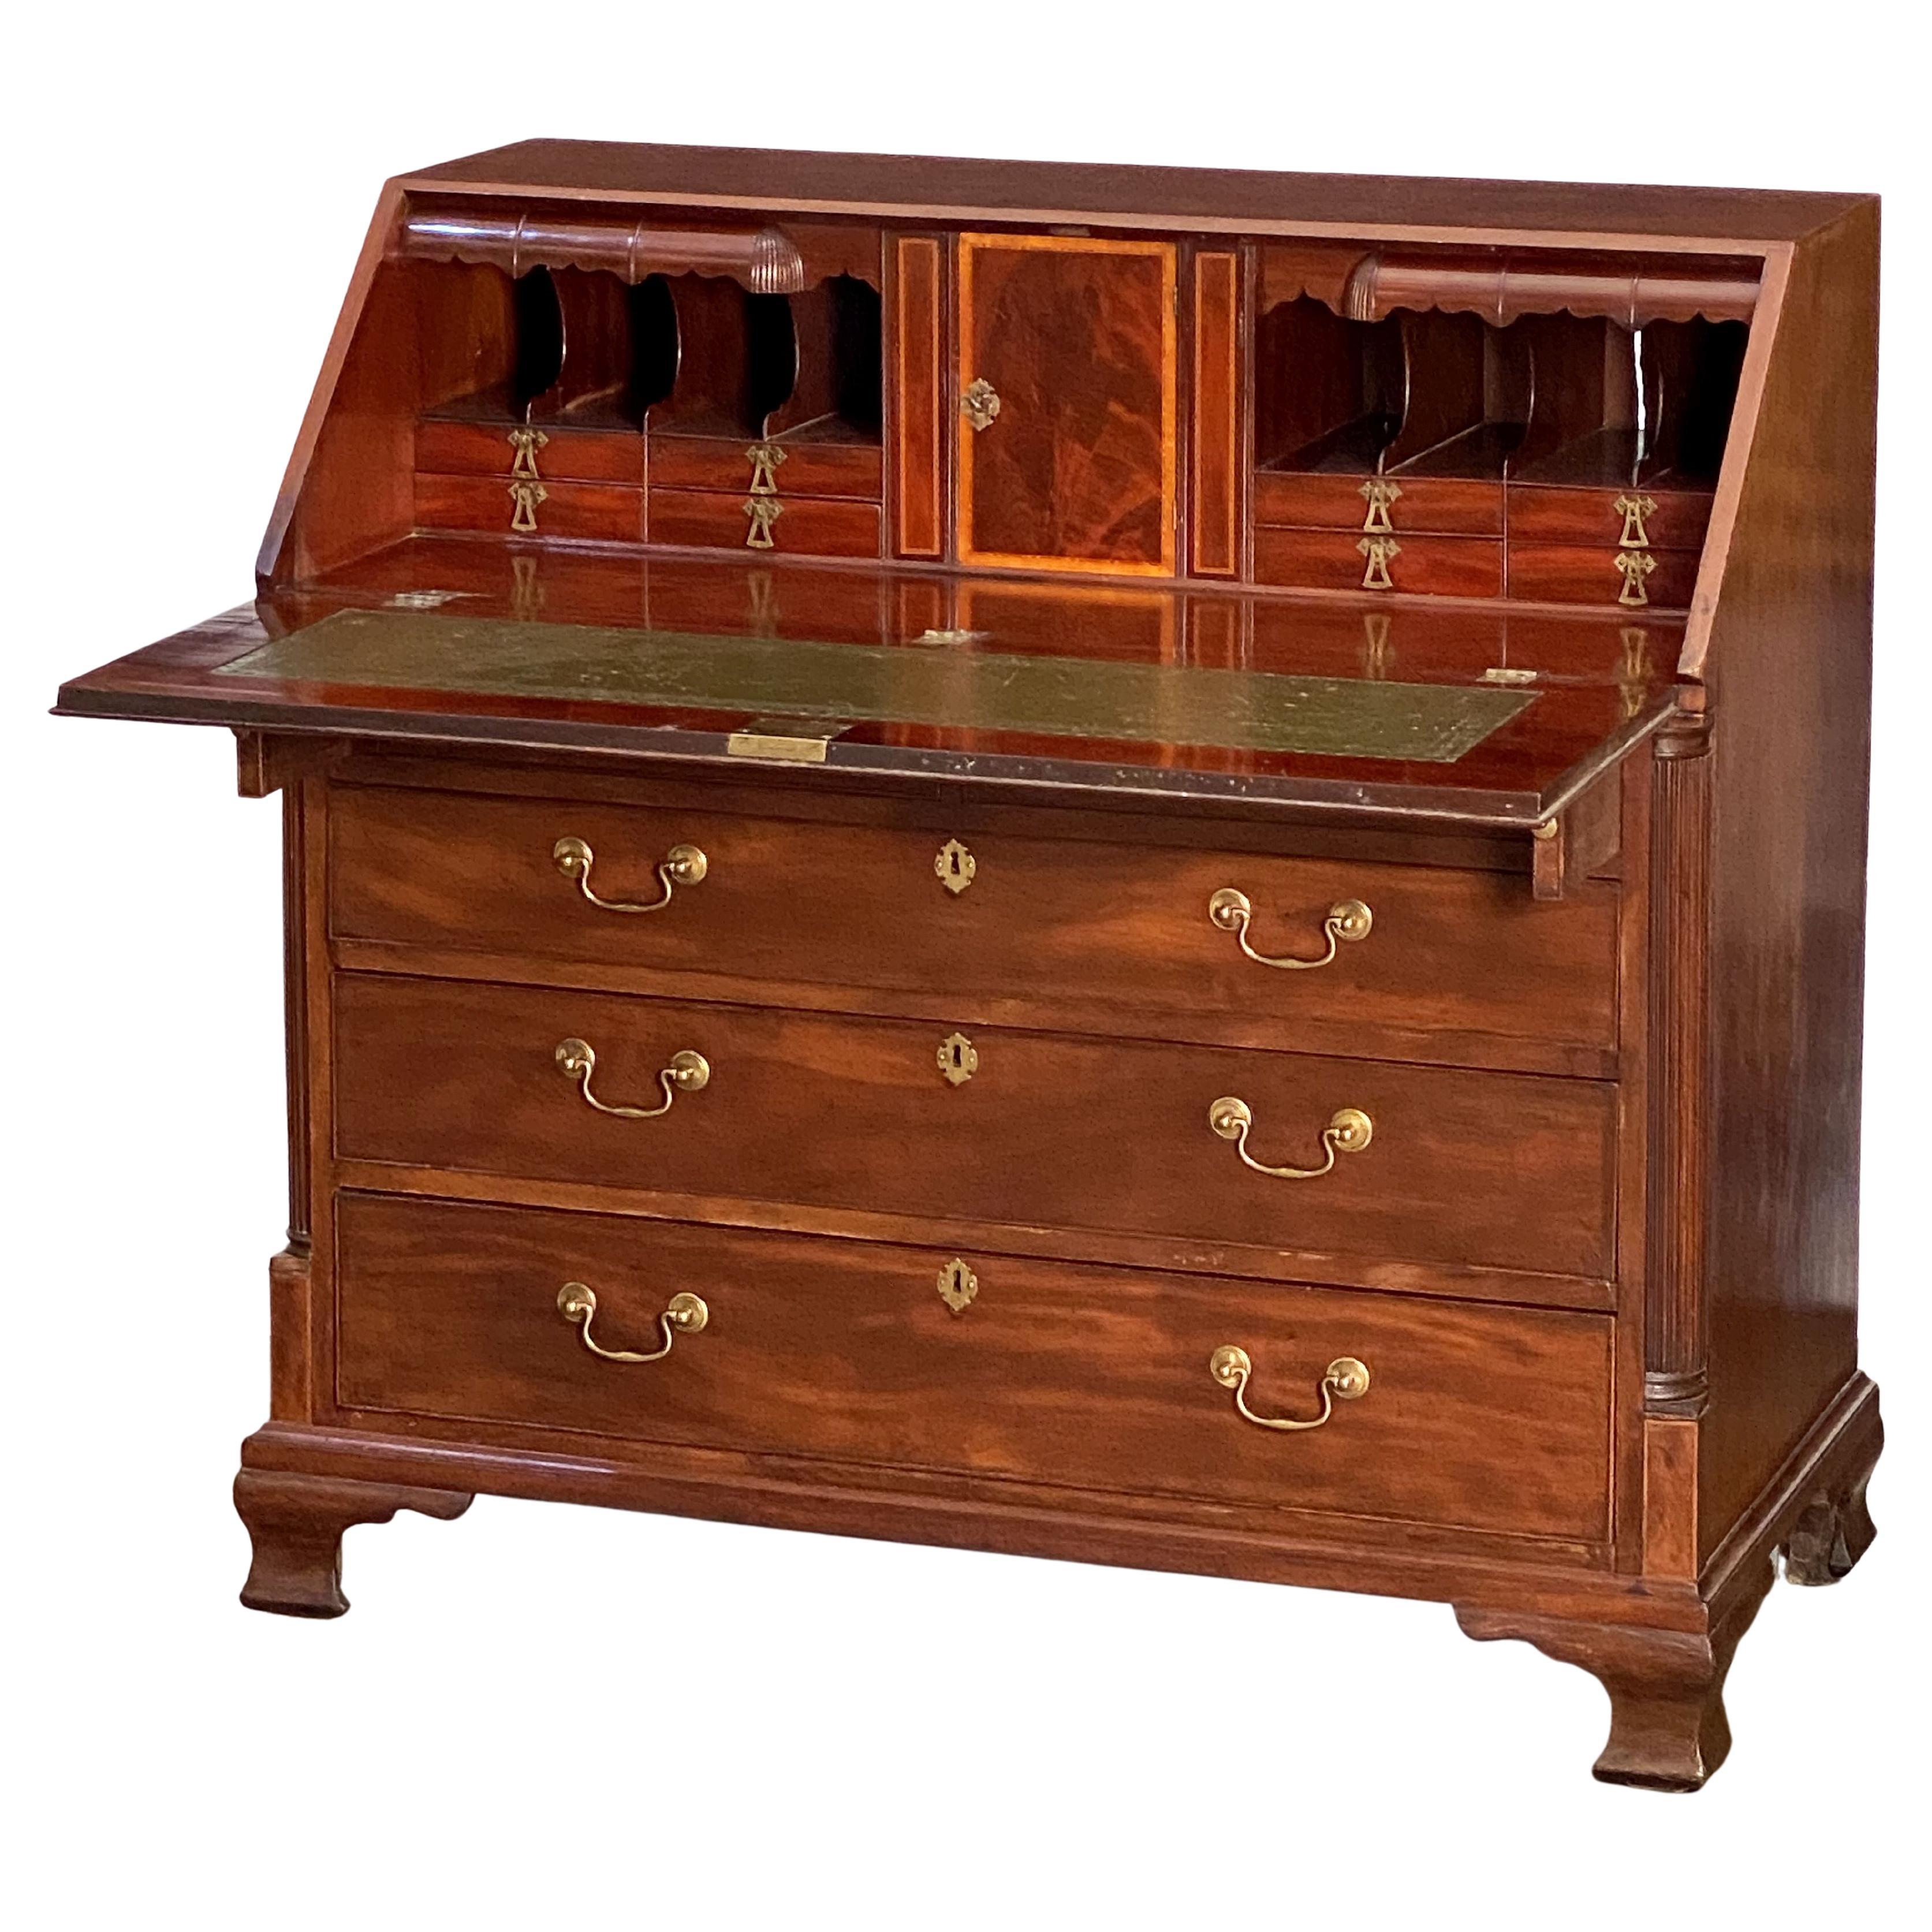 A fine George III slant top desk or bureau secretary chest of patinated mahogany, c.1770 - an inlaid slant front drops to reveal a series of small drawers and document compartments, over two short drawers and three graduated long drawers, the